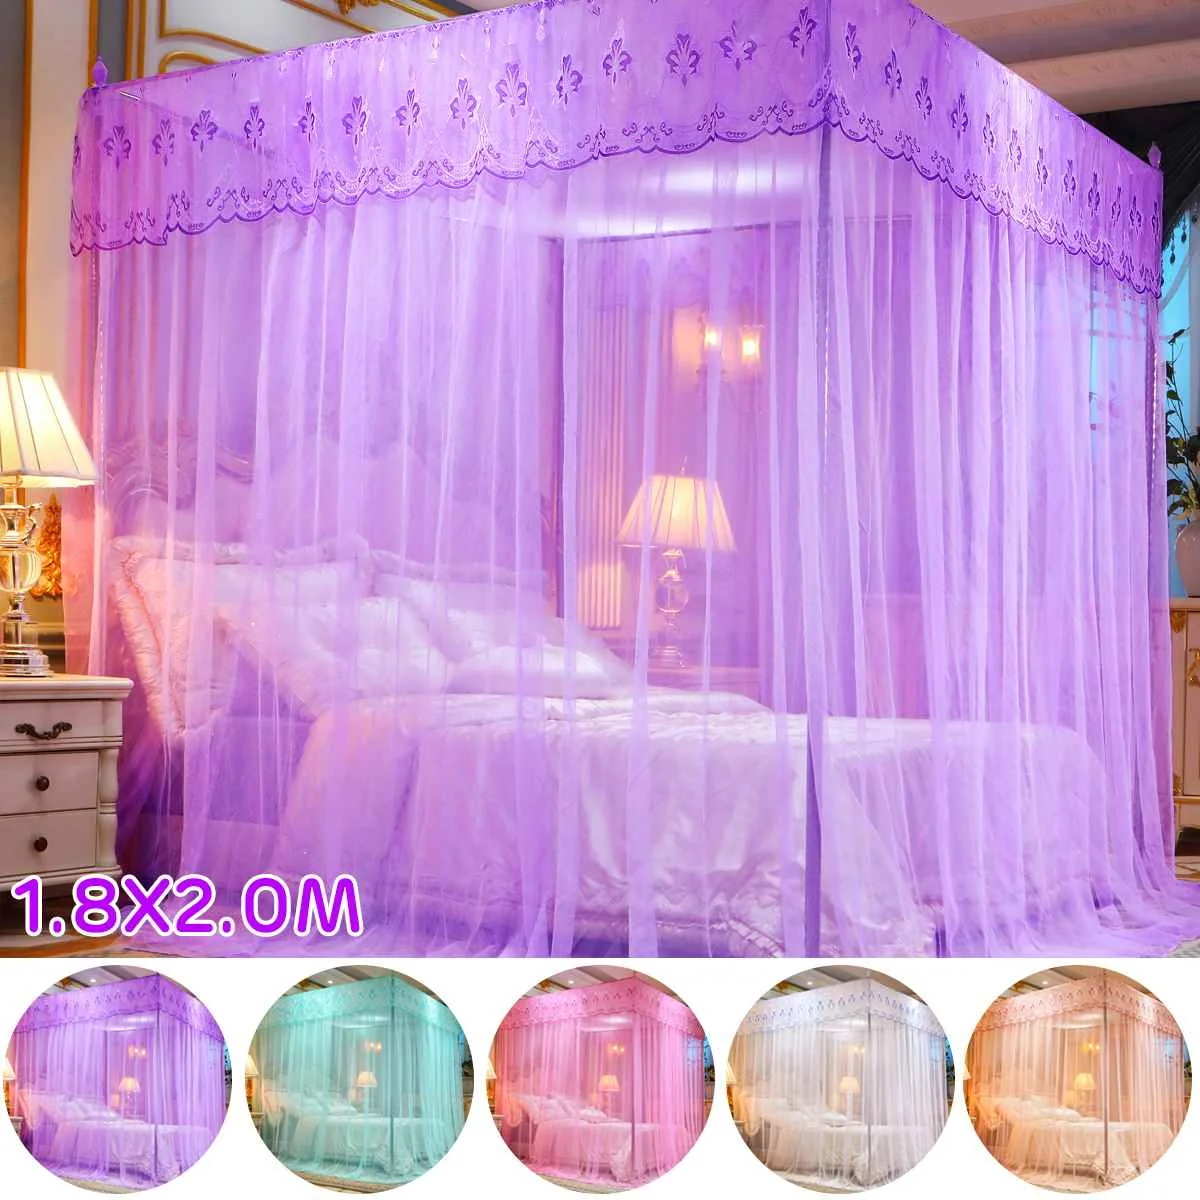 

Four Corner Mosquito Netting Canopy Mosquito Net For Double Bed Mosquito Repellent Tent Insect Reject Canopy Bed Curtain